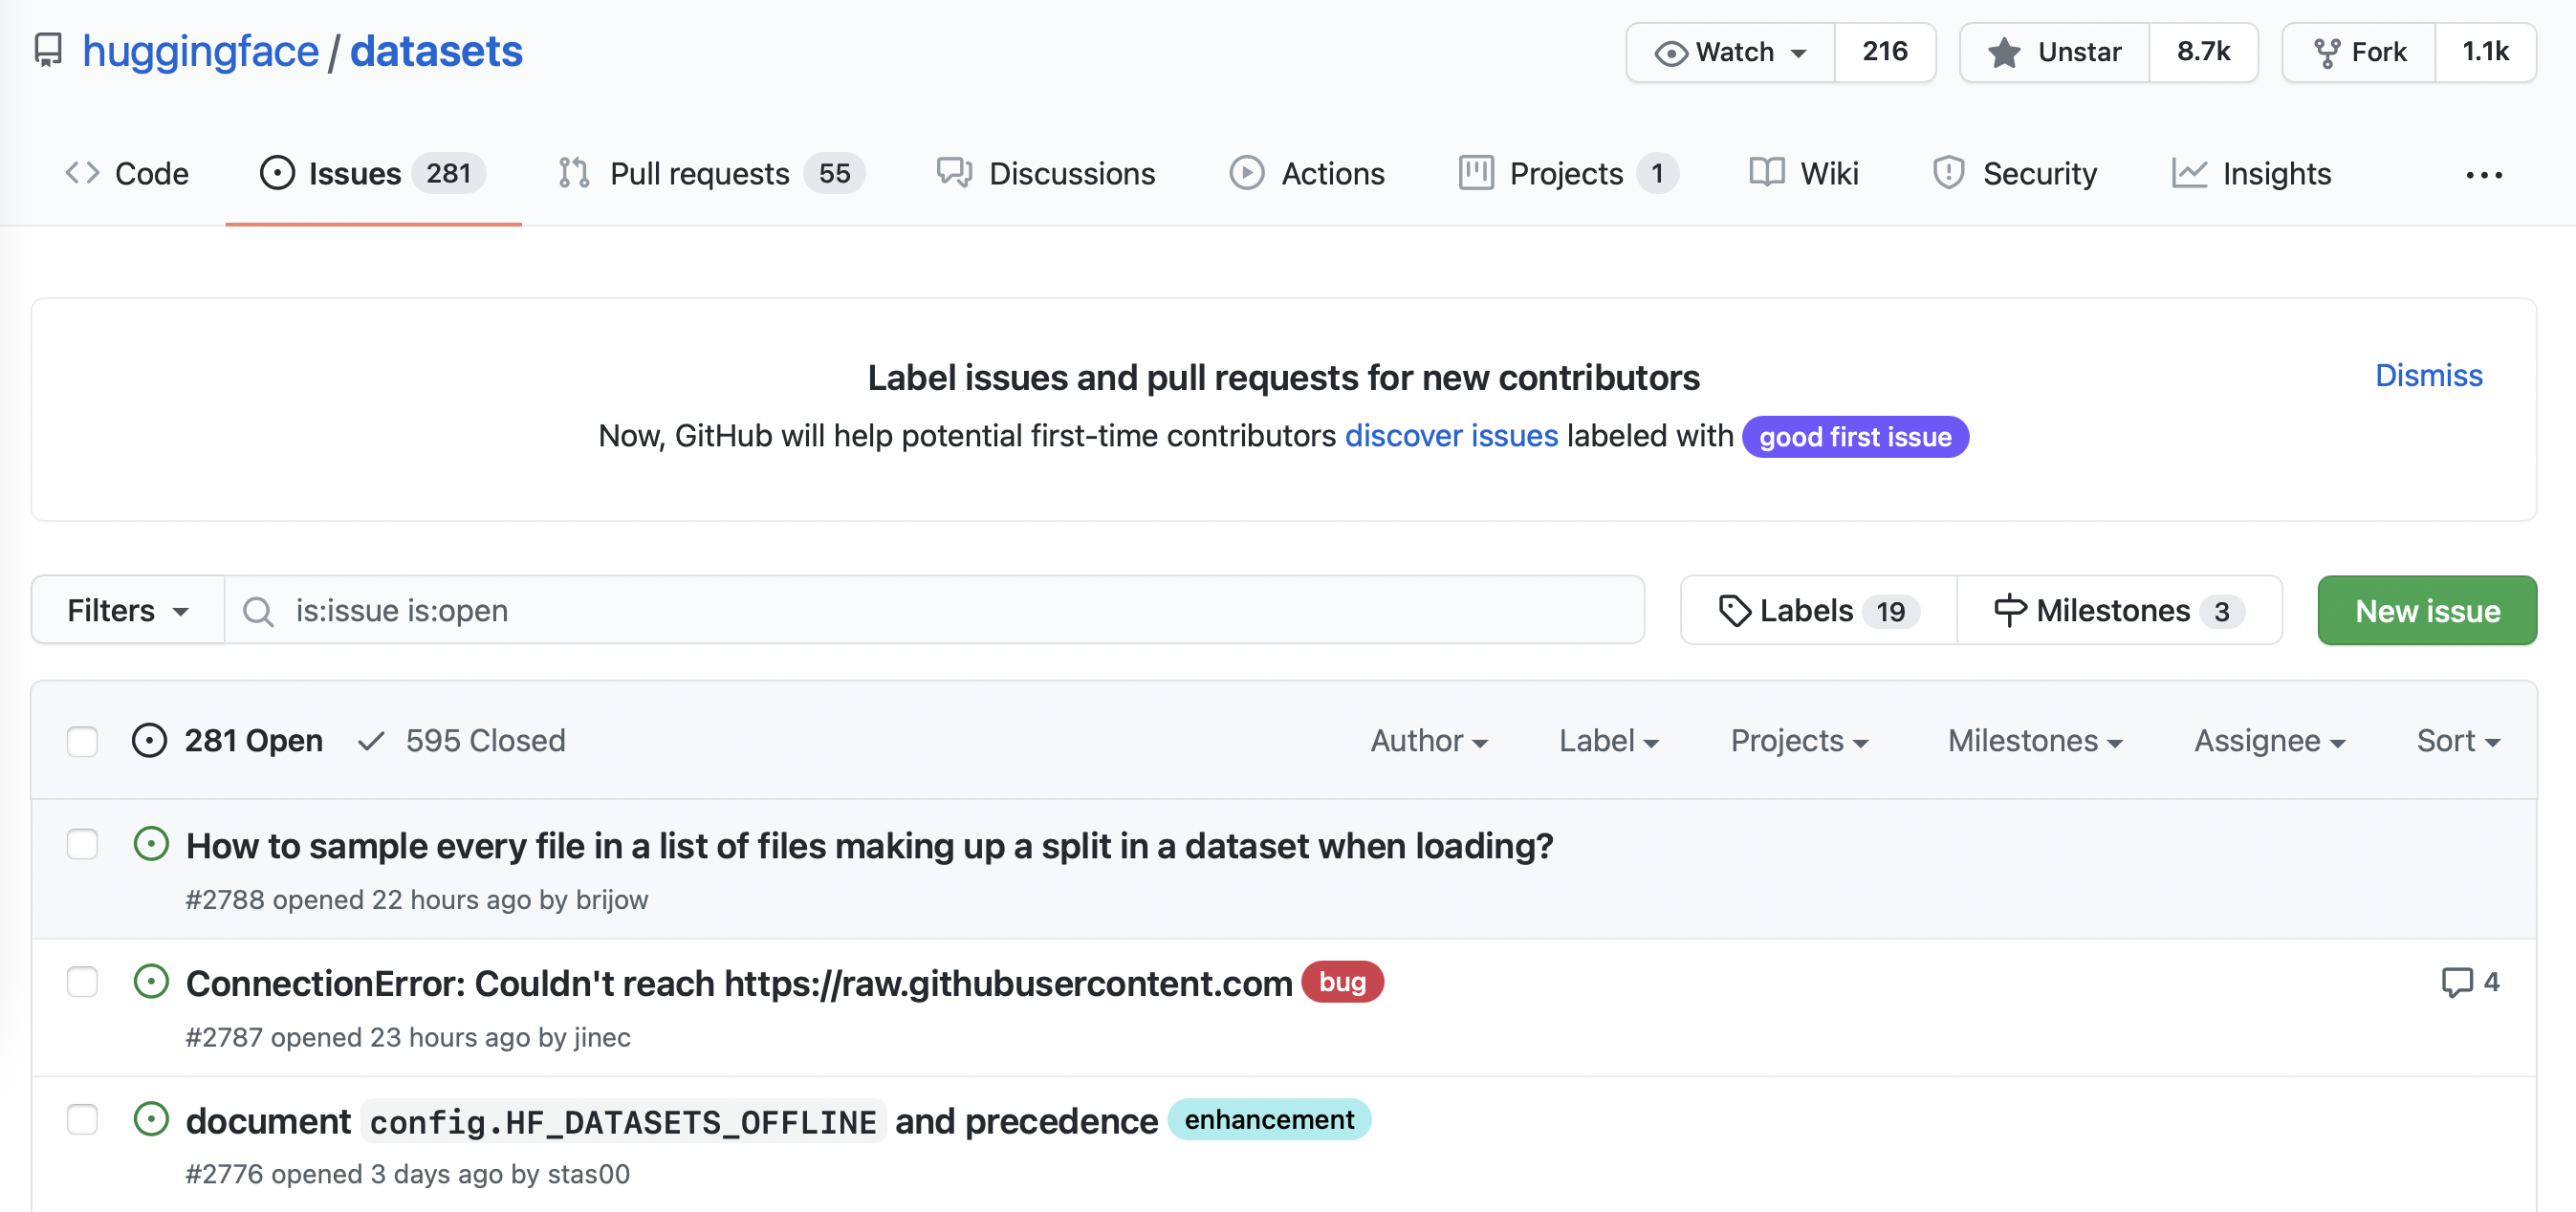 The GitHub issues associated with 🤗 Datasets.